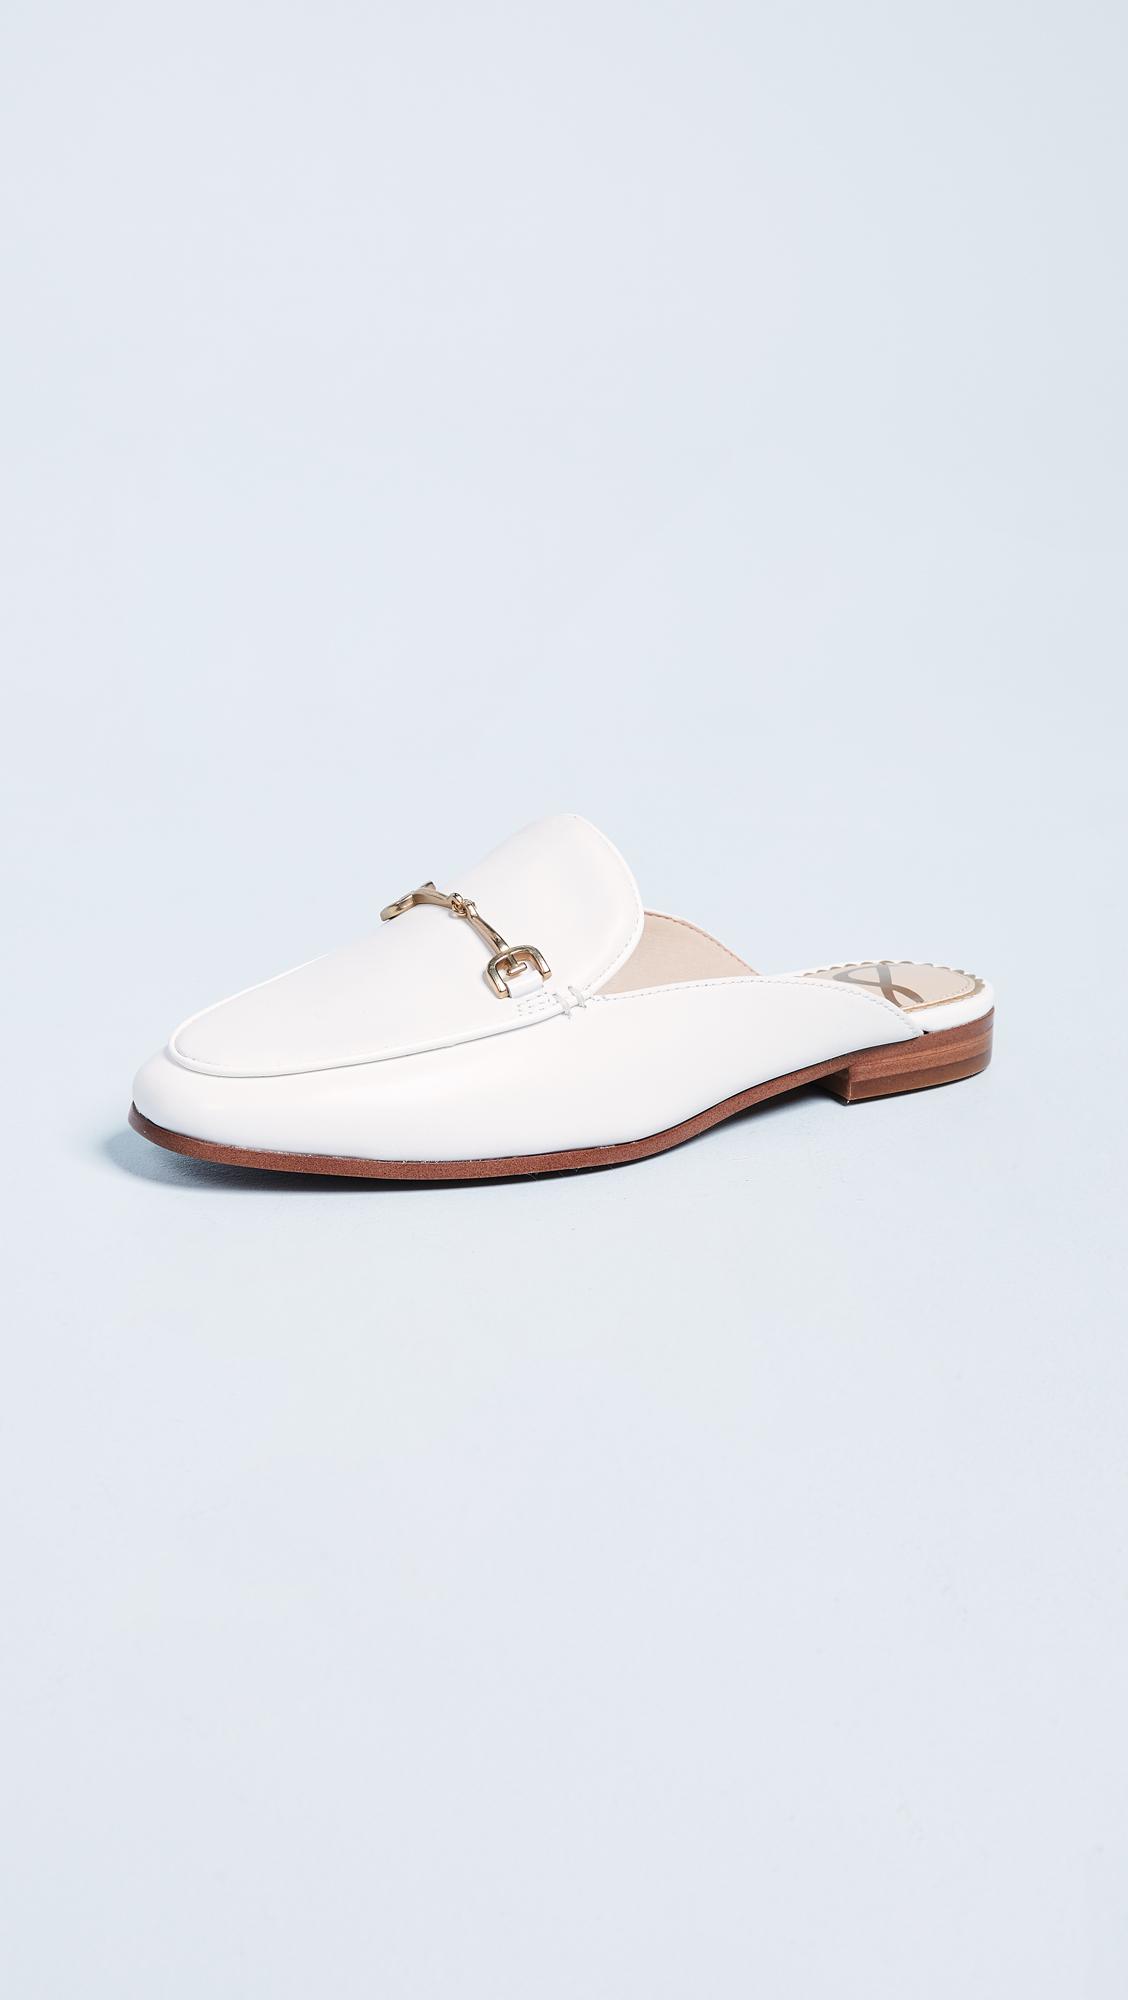 Sam Edelman Leather Linnie Flat Mules in Bright White Leather (White